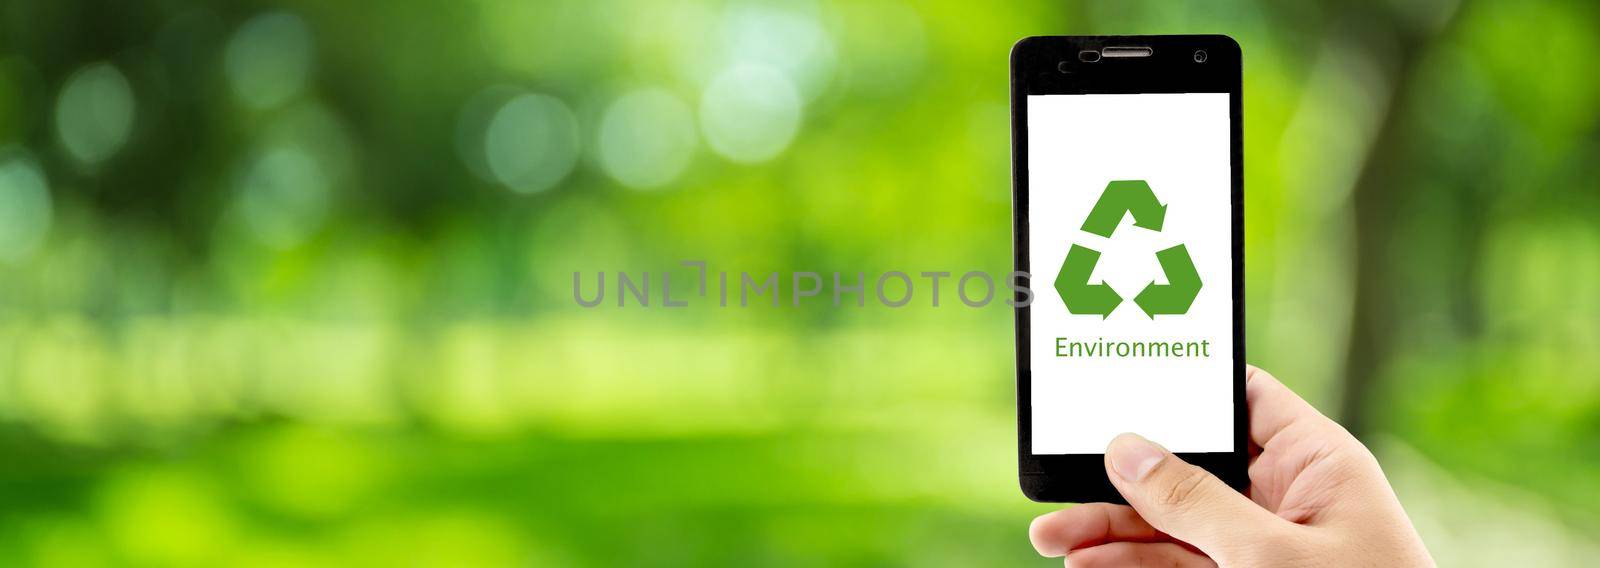 Smart phone holding hand with recycle symbol eco environment Icon concept with green bokeh background, ecology conservation and reuse, reduce using and protection resources in nature, banner website.